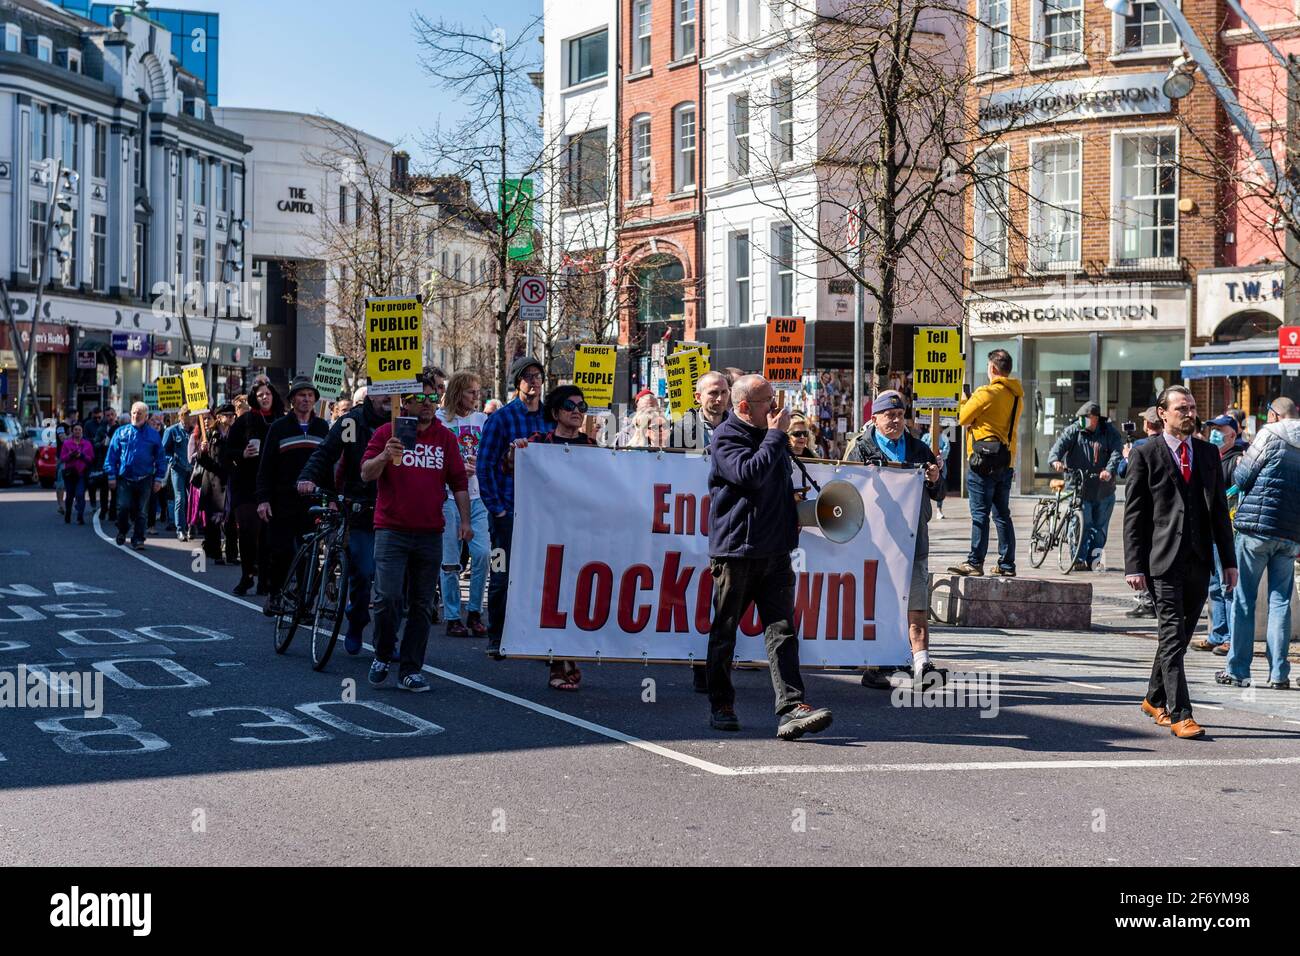 Cork, Ireland. 3rd Apr, 2021. An 'End the Lockdown' protest tokk place in Cork today, the second such event in the space of a month. Approximately 300 people attended in the midst of a heavy Garda presence. The protesters marched to a rally outside Brown Thomas on Patrick Street. Credit: AG News/Alamy Live News Stock Photo